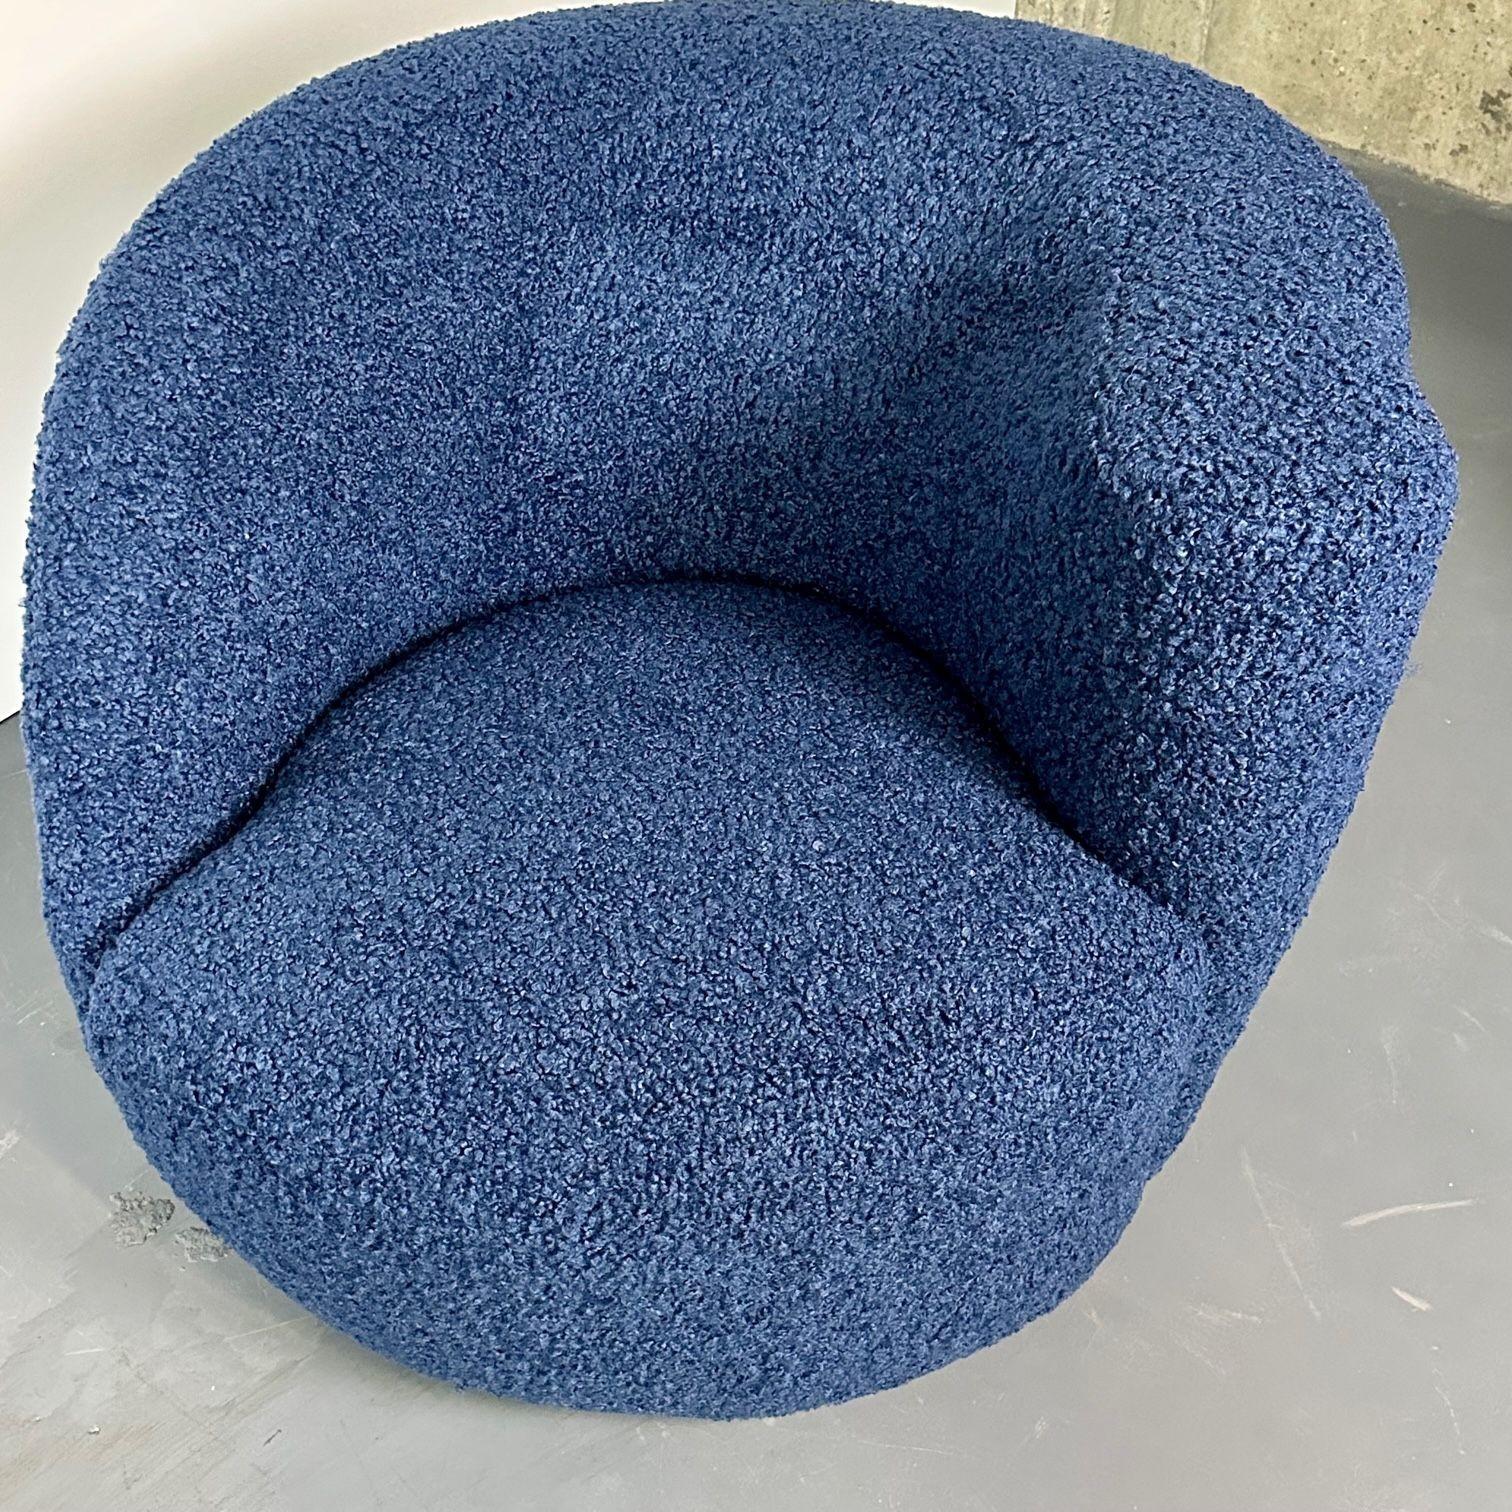 Pair of Mid-Century Modern Swivel / Lounge Chairs, Blue Faux Fur For Sale 4